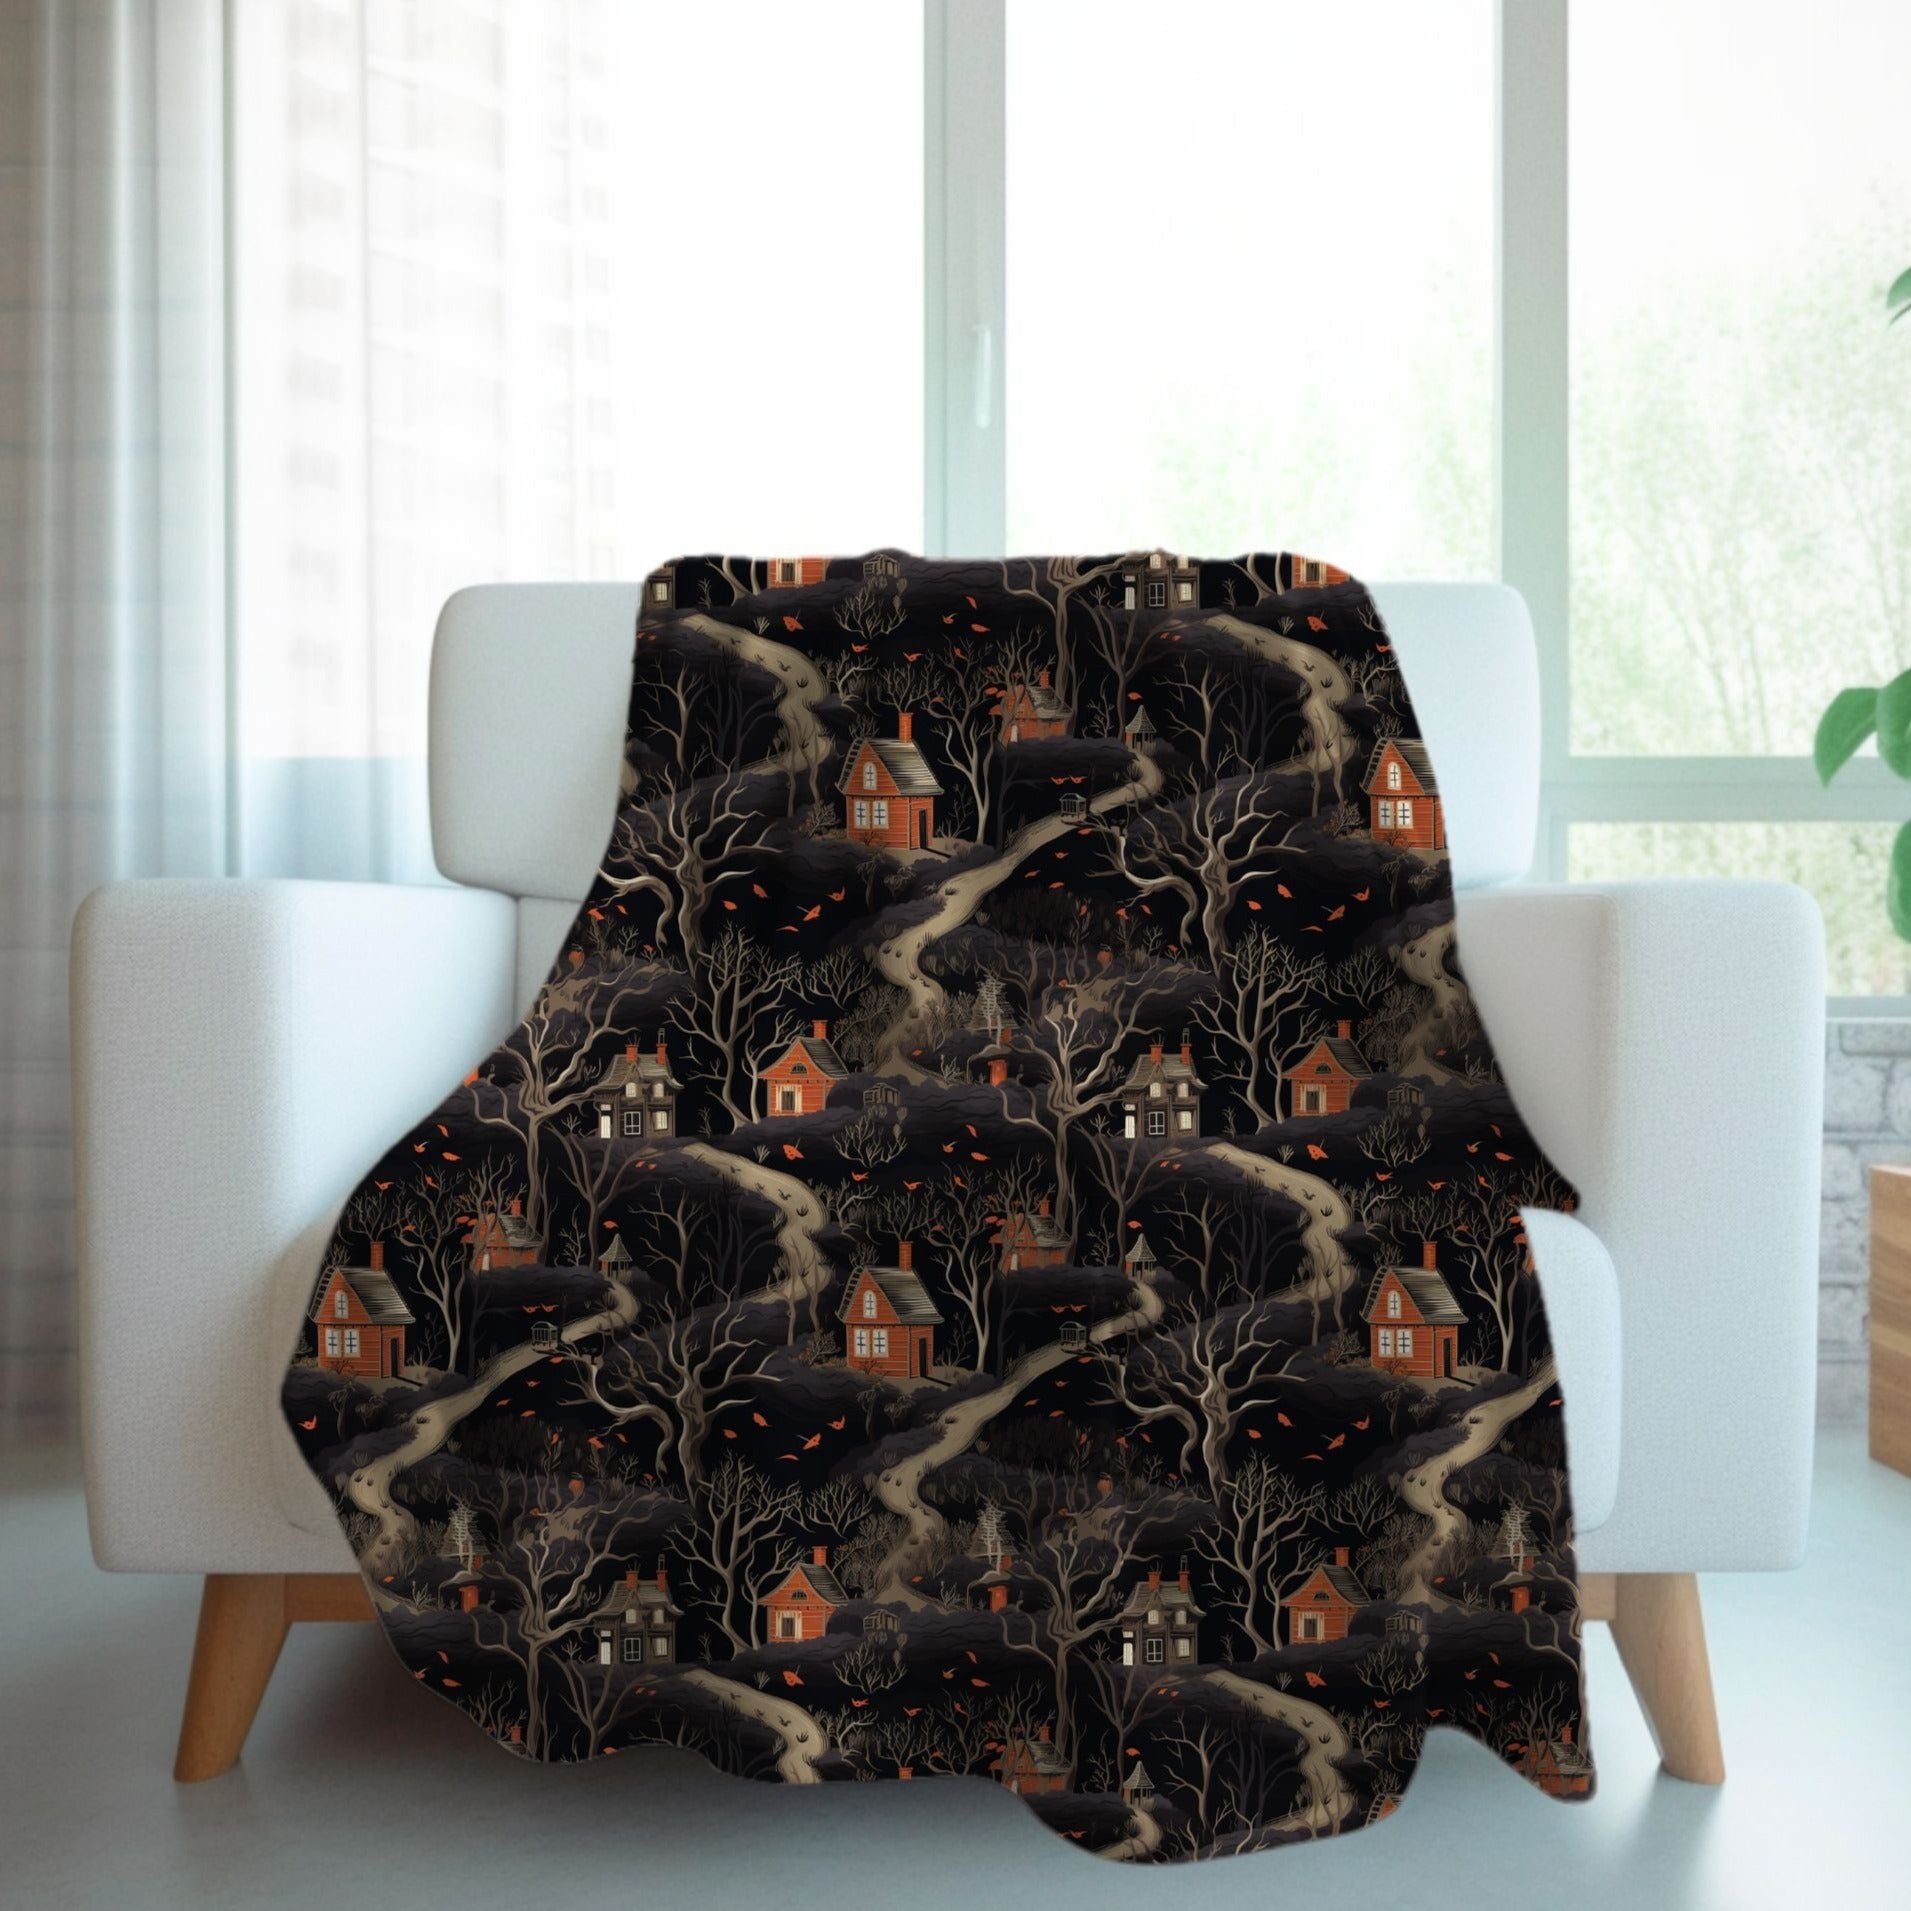 Witches Woodland Throw Blanket in Sherpa or Velveteen Plush